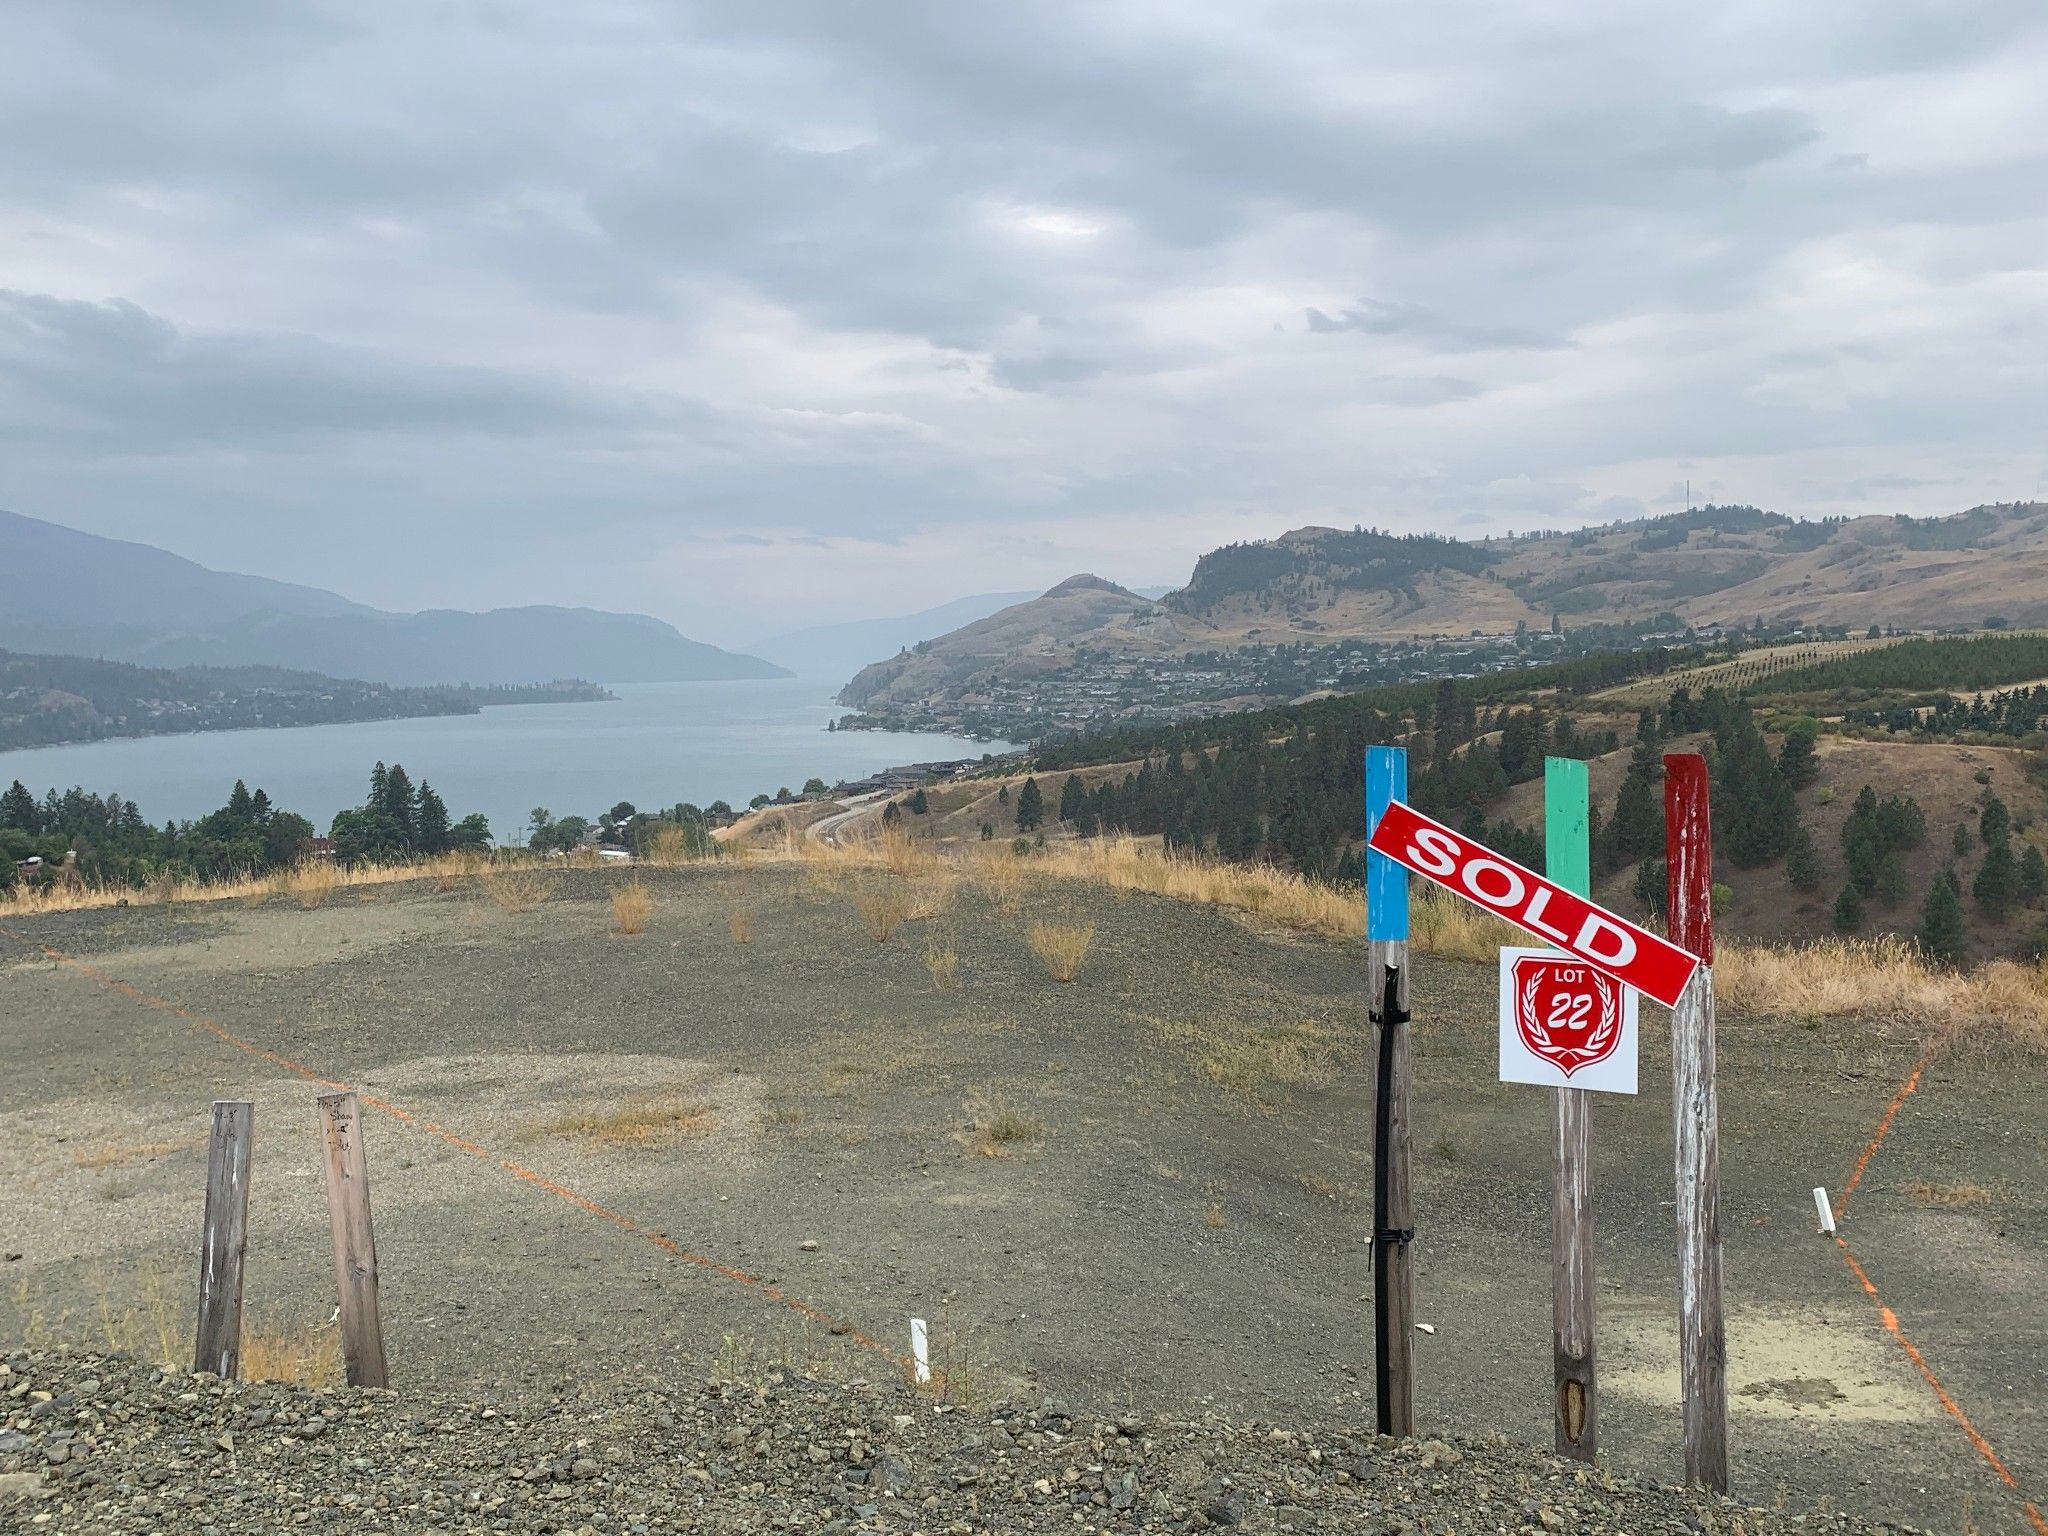 Main Photo: Lot 22 904 Mt Griffin Road in Vernon: Middlton Mtn Vacant Land for sale (North Okanagan)  : MLS®# 10215264